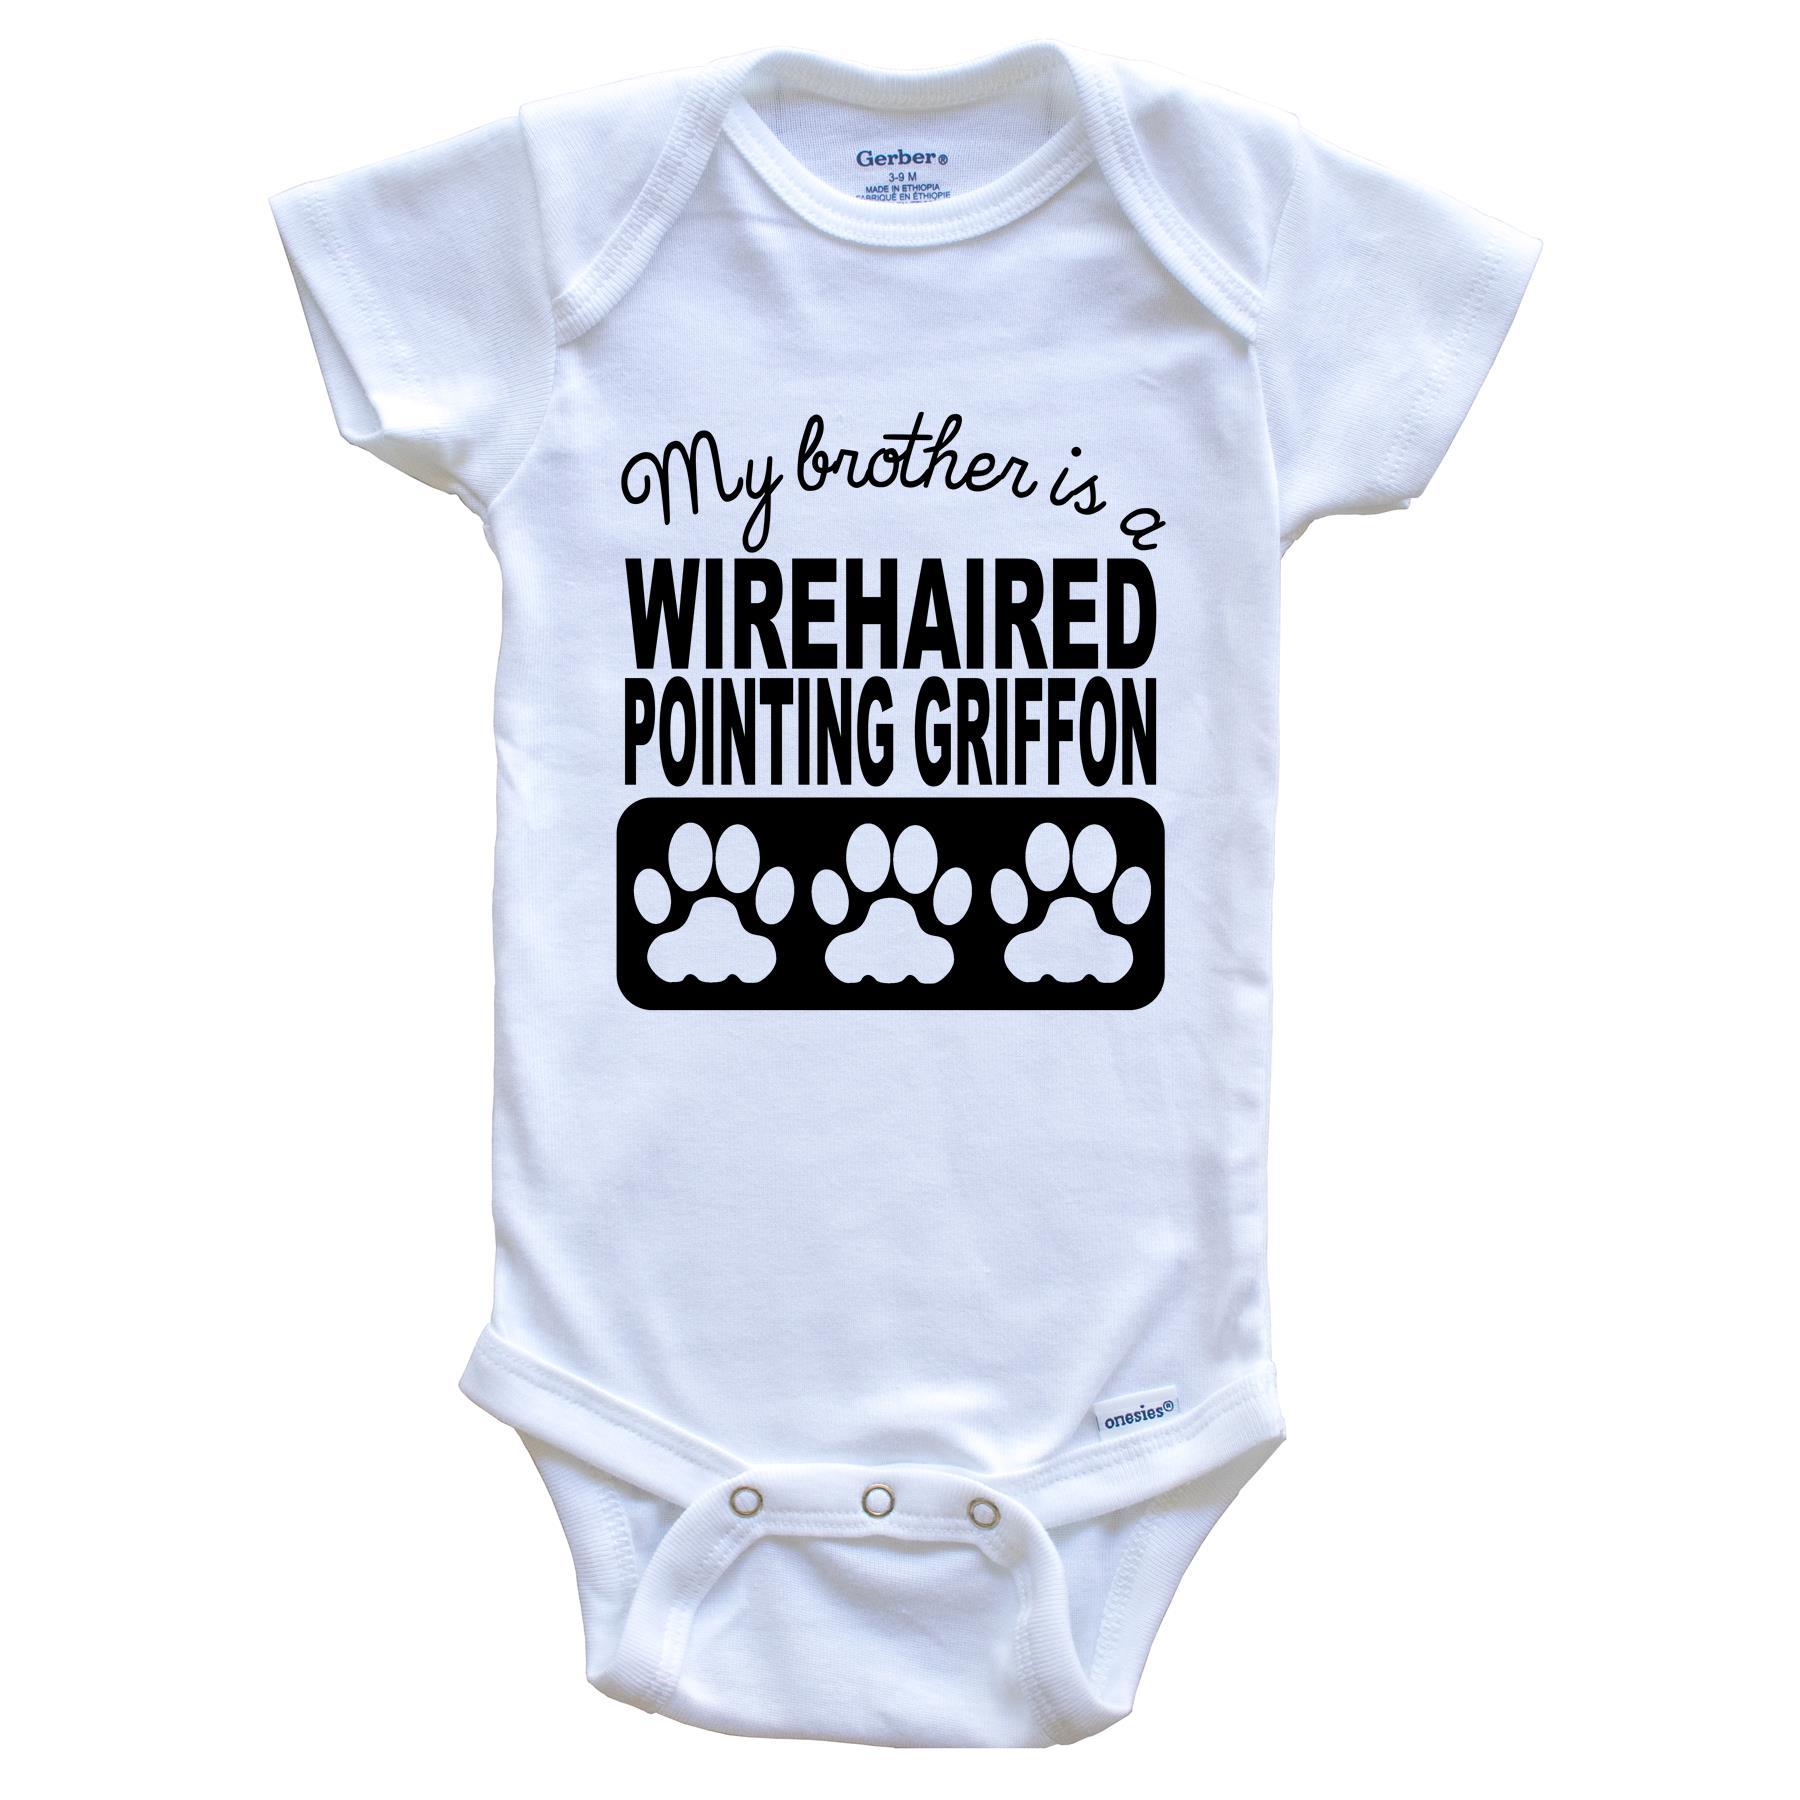 My Brother Is A Wirehaired Pointing Griffon Baby Onesie